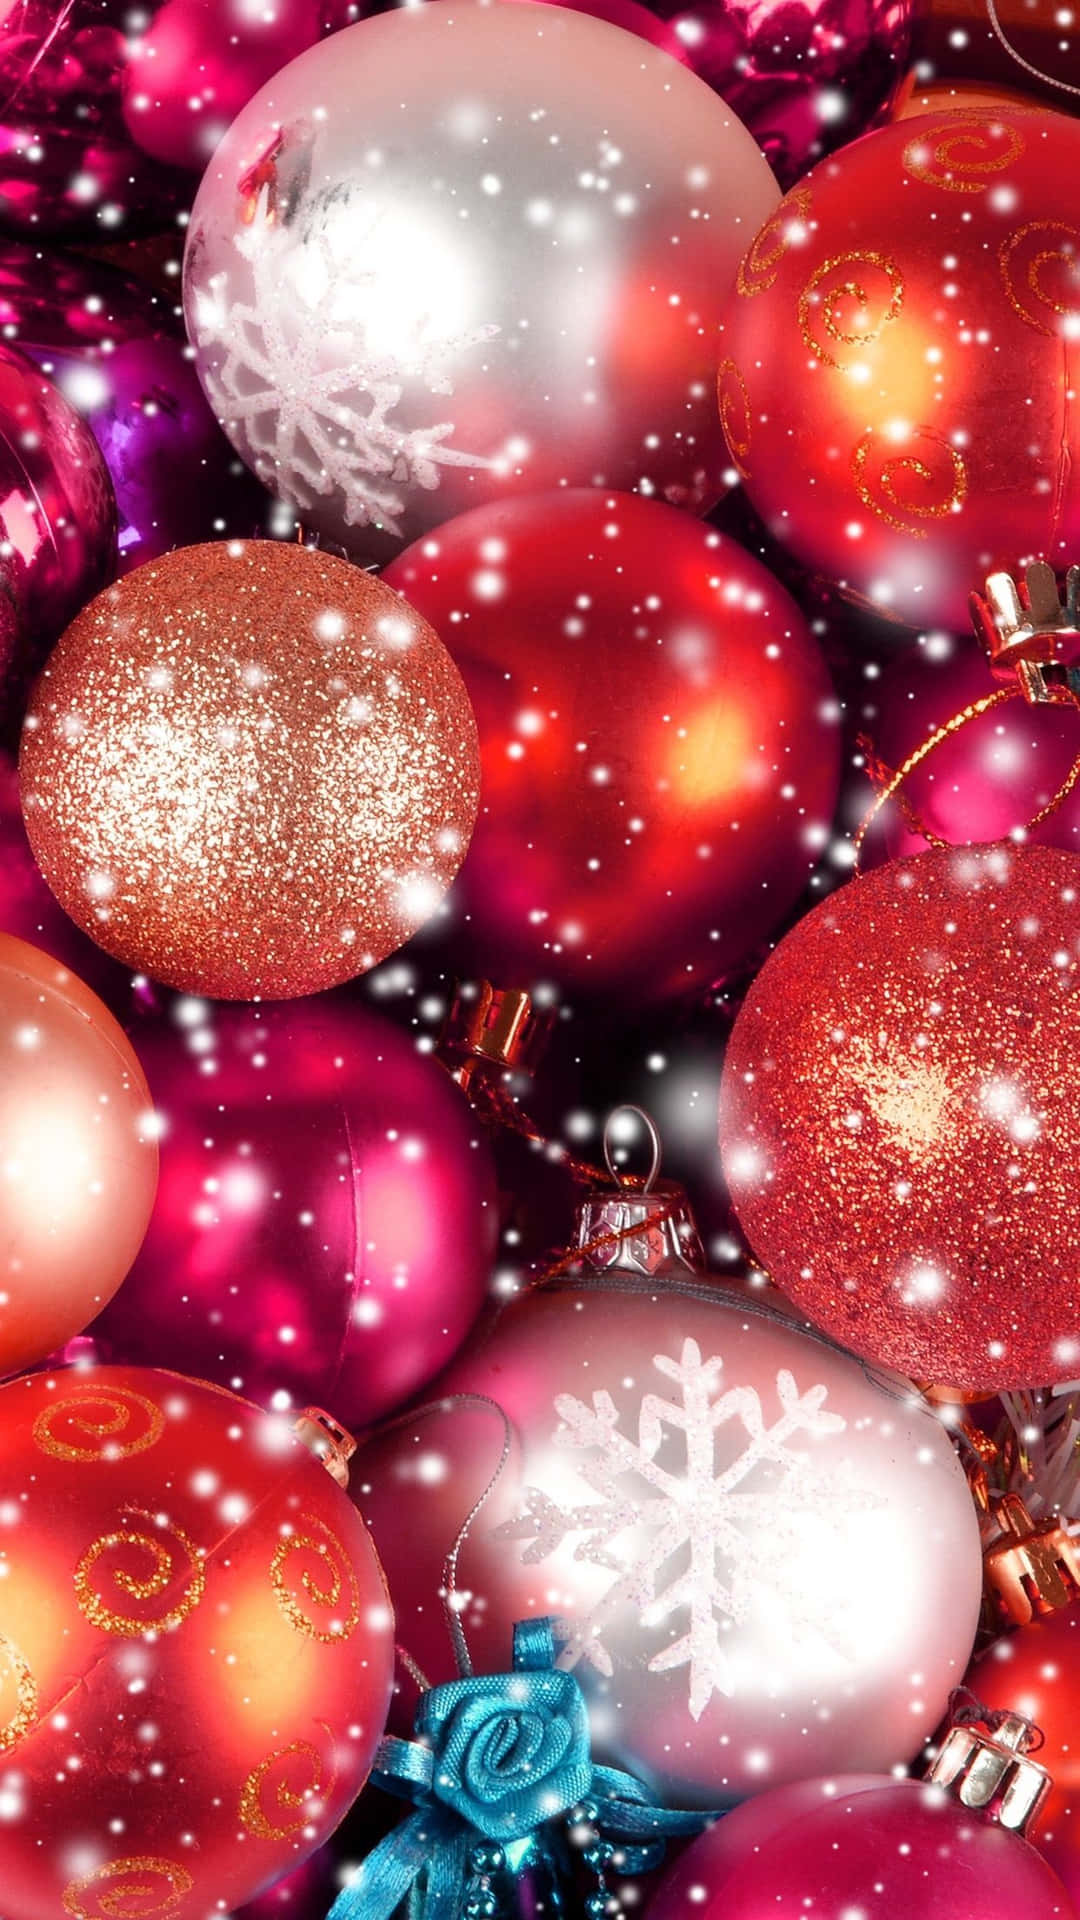 Christmas Ornaments In A Snowy Background Wallpaper